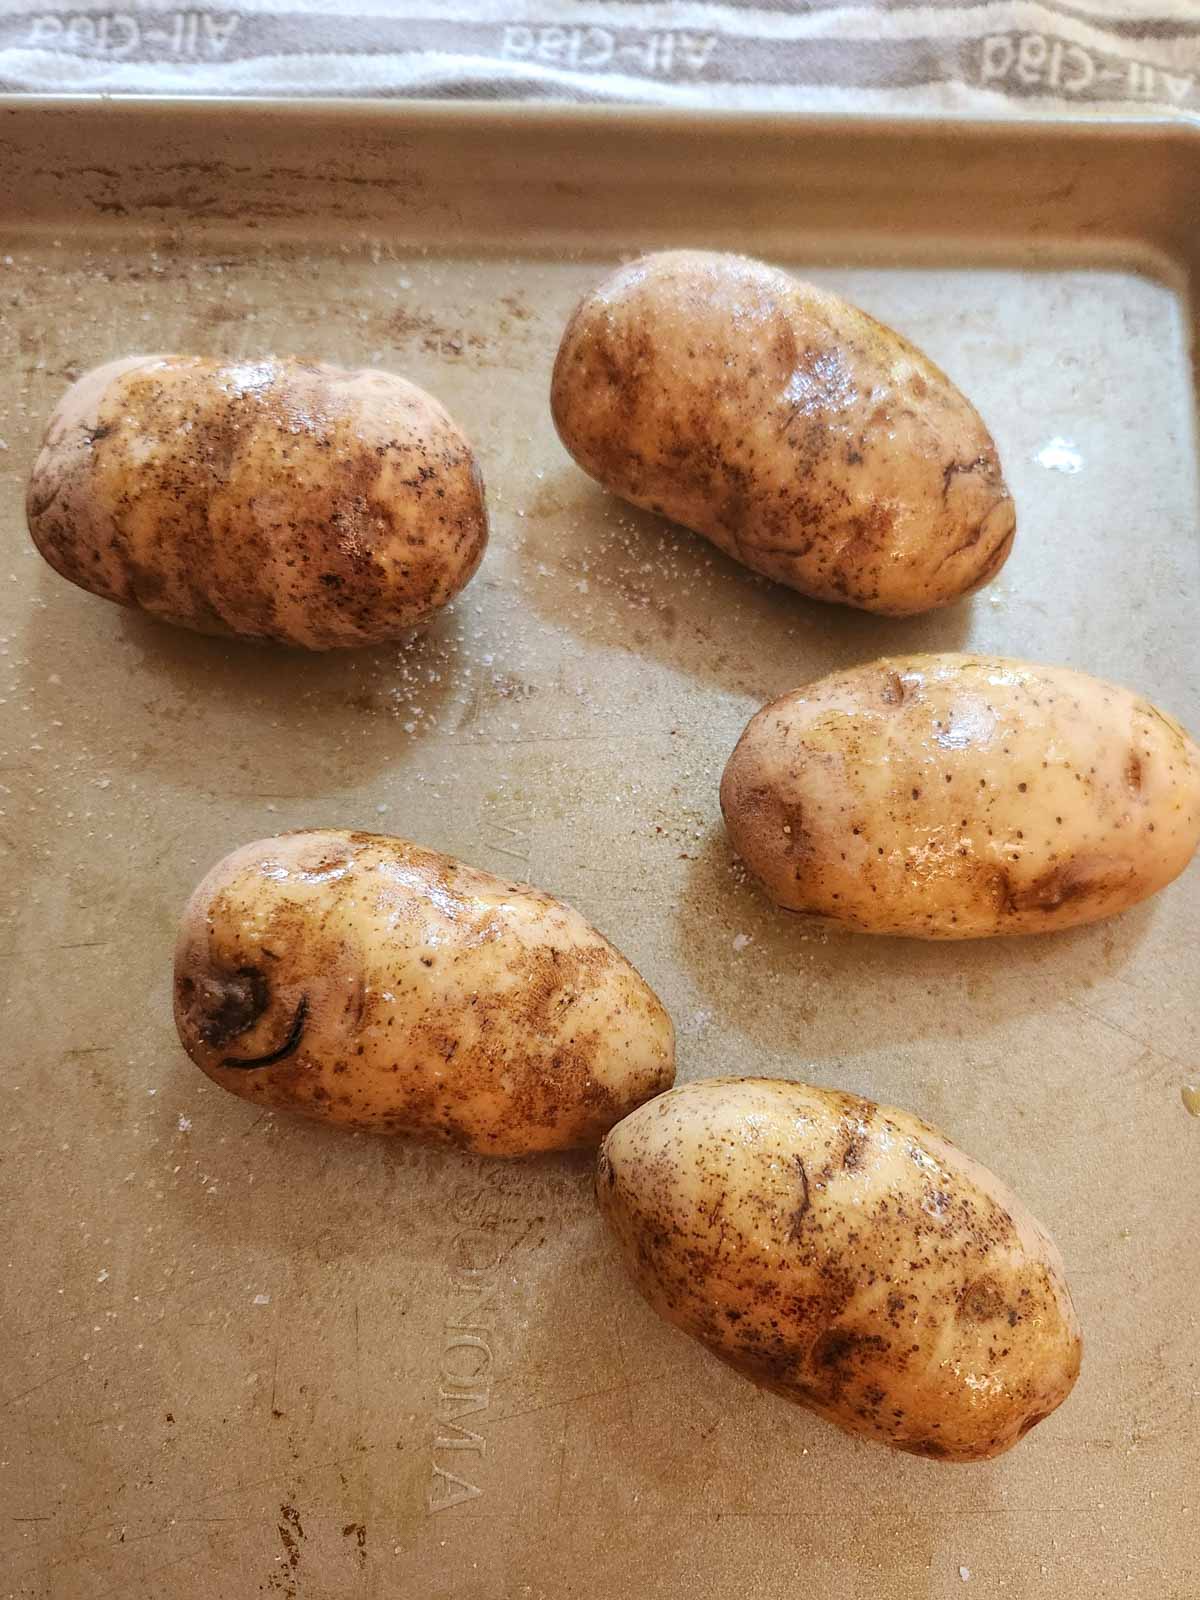 russet potatoes that are pierced with a knife and coated in olive oil and kosher salt